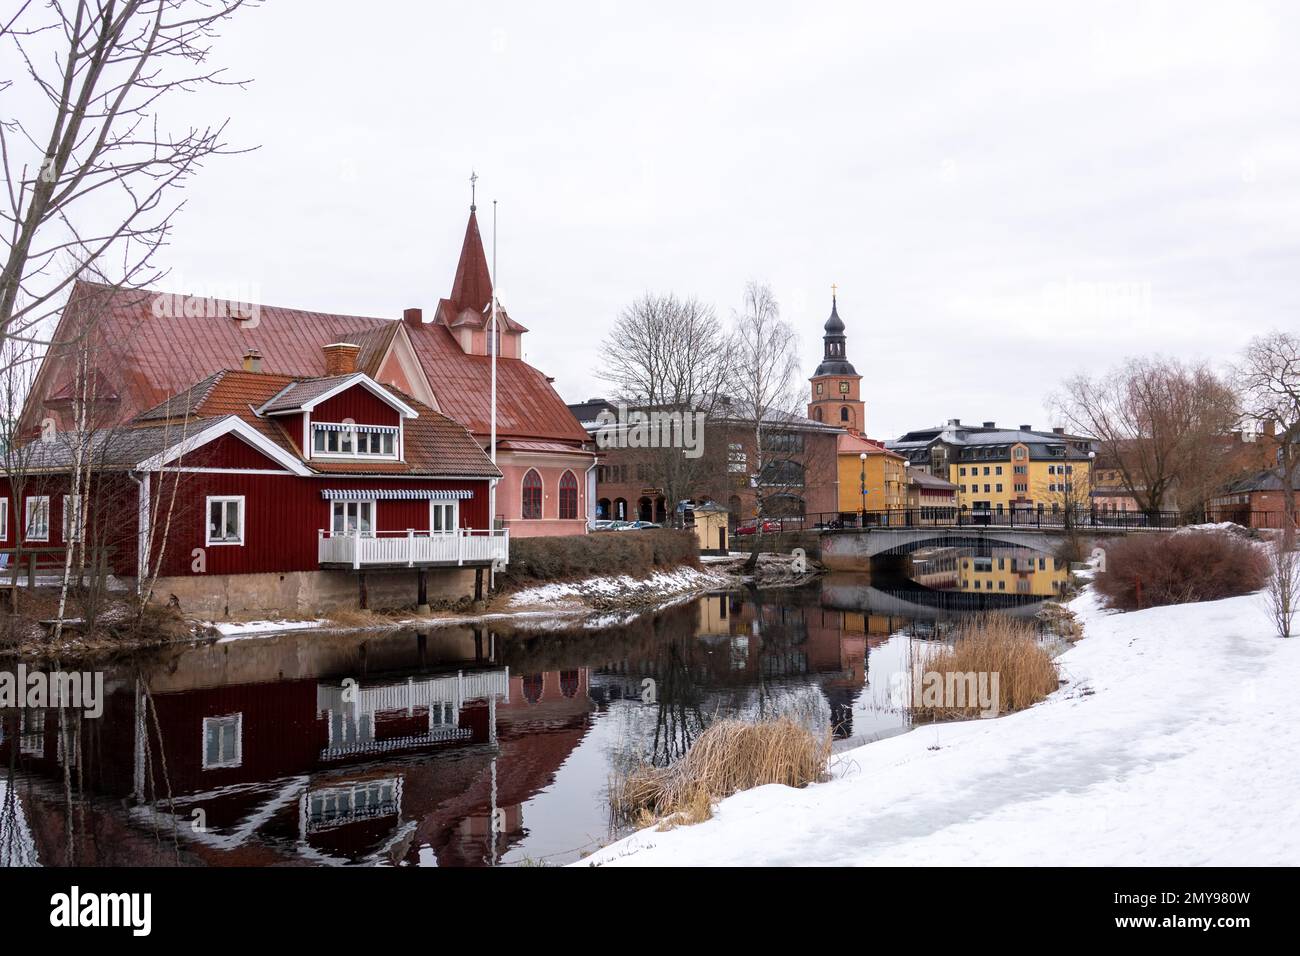 Old tow of Falun with traditional, picturesque, red wooden houses in the city of Falun in Dalarna, Sweded Stock Photo